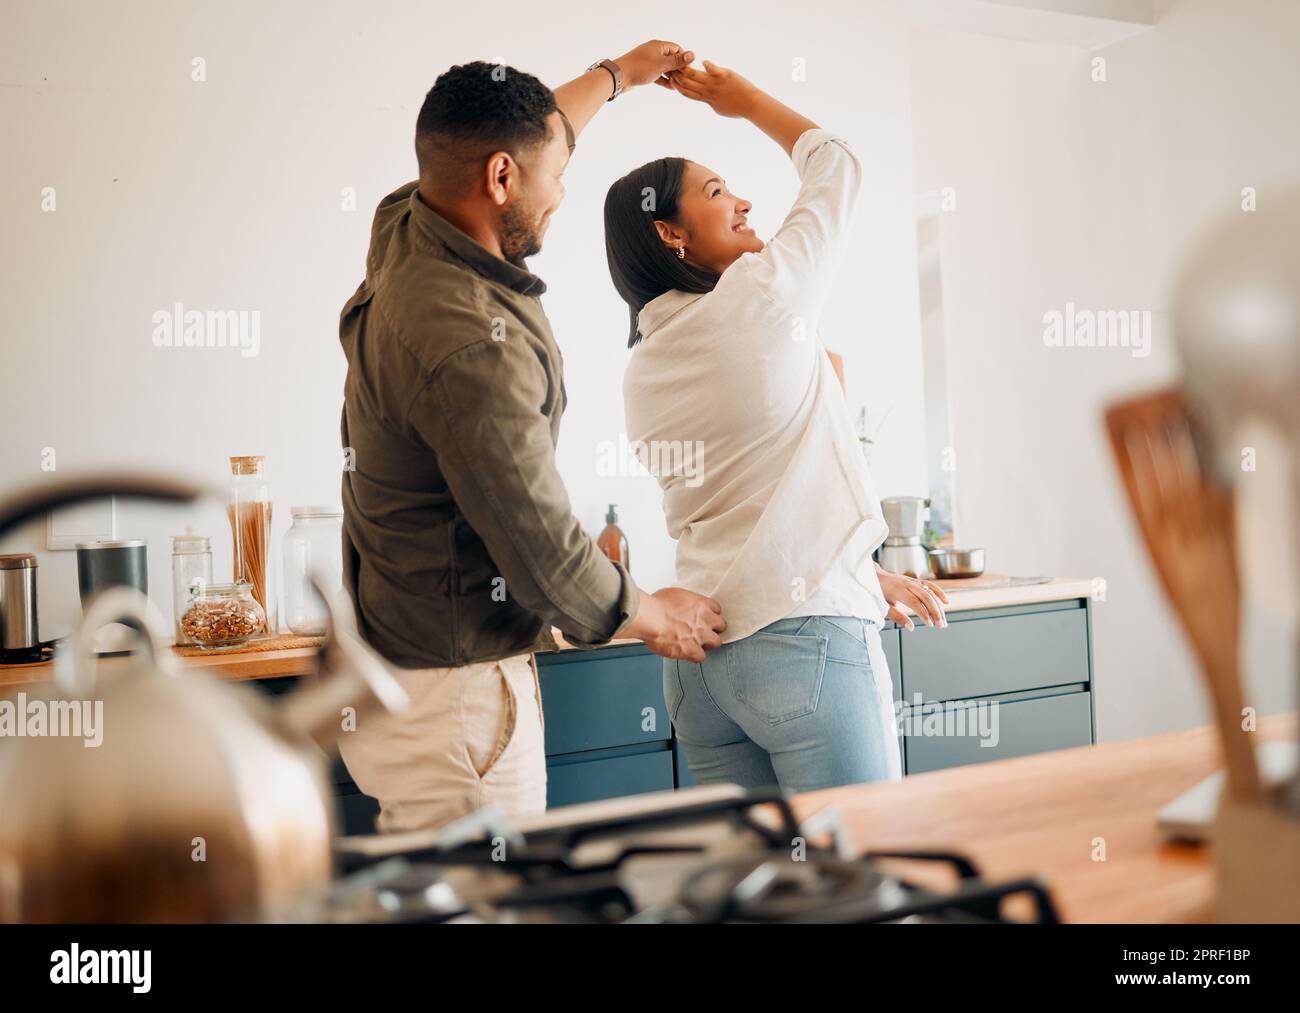 Dancing, romance and playful couple having fun, love and bonding while laughing, spinning and twirling together at home. Loving husband enjoying care, affection and joy while relaxing with happy wife Stock Photo